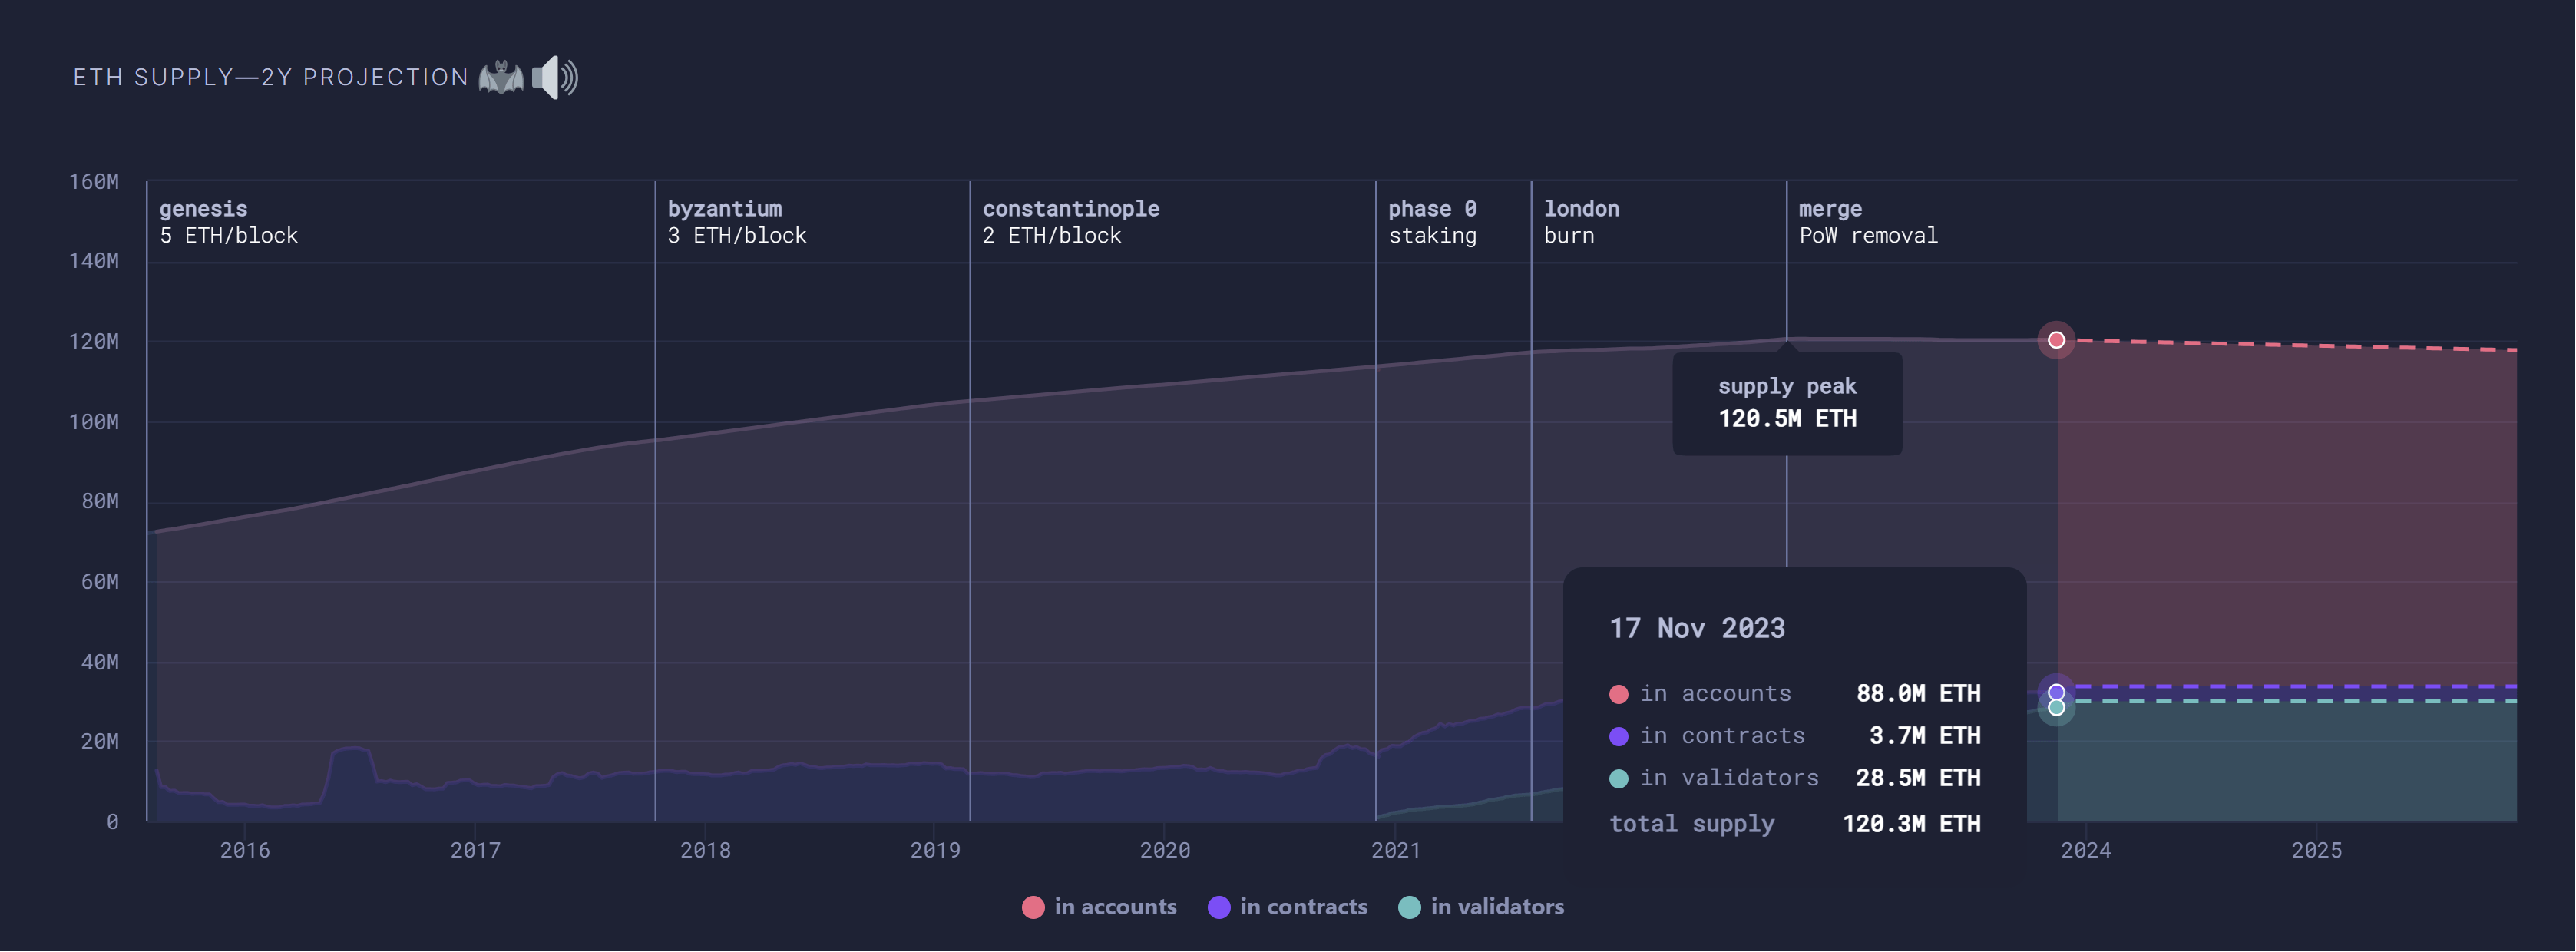 Ethereum burn rate and projected supply